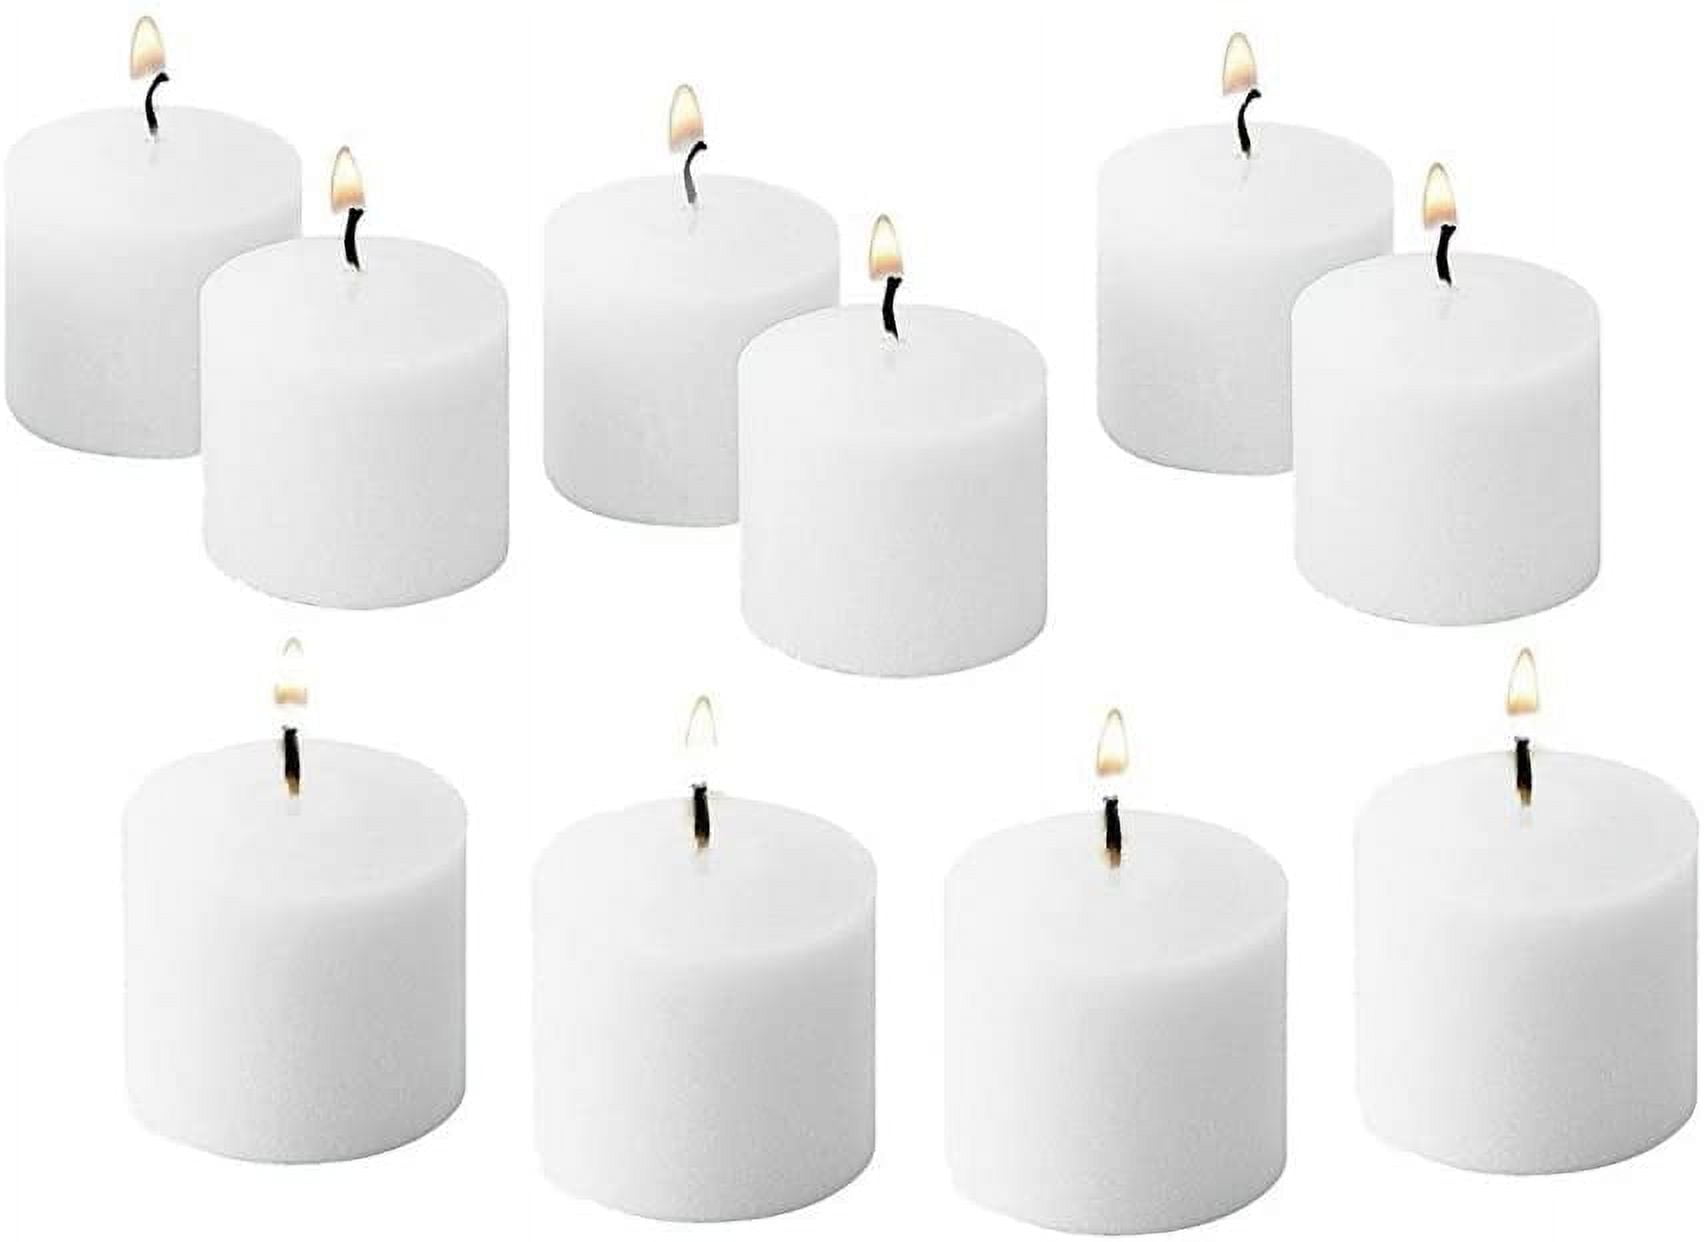 7 hr Bulk Tealight Candles White Unscented Smokeless Wedding Extended Burn  time 7 Hour White Votive Tea Lights Home & Holiday Decorations Set of 100 -  D'light Online Inc